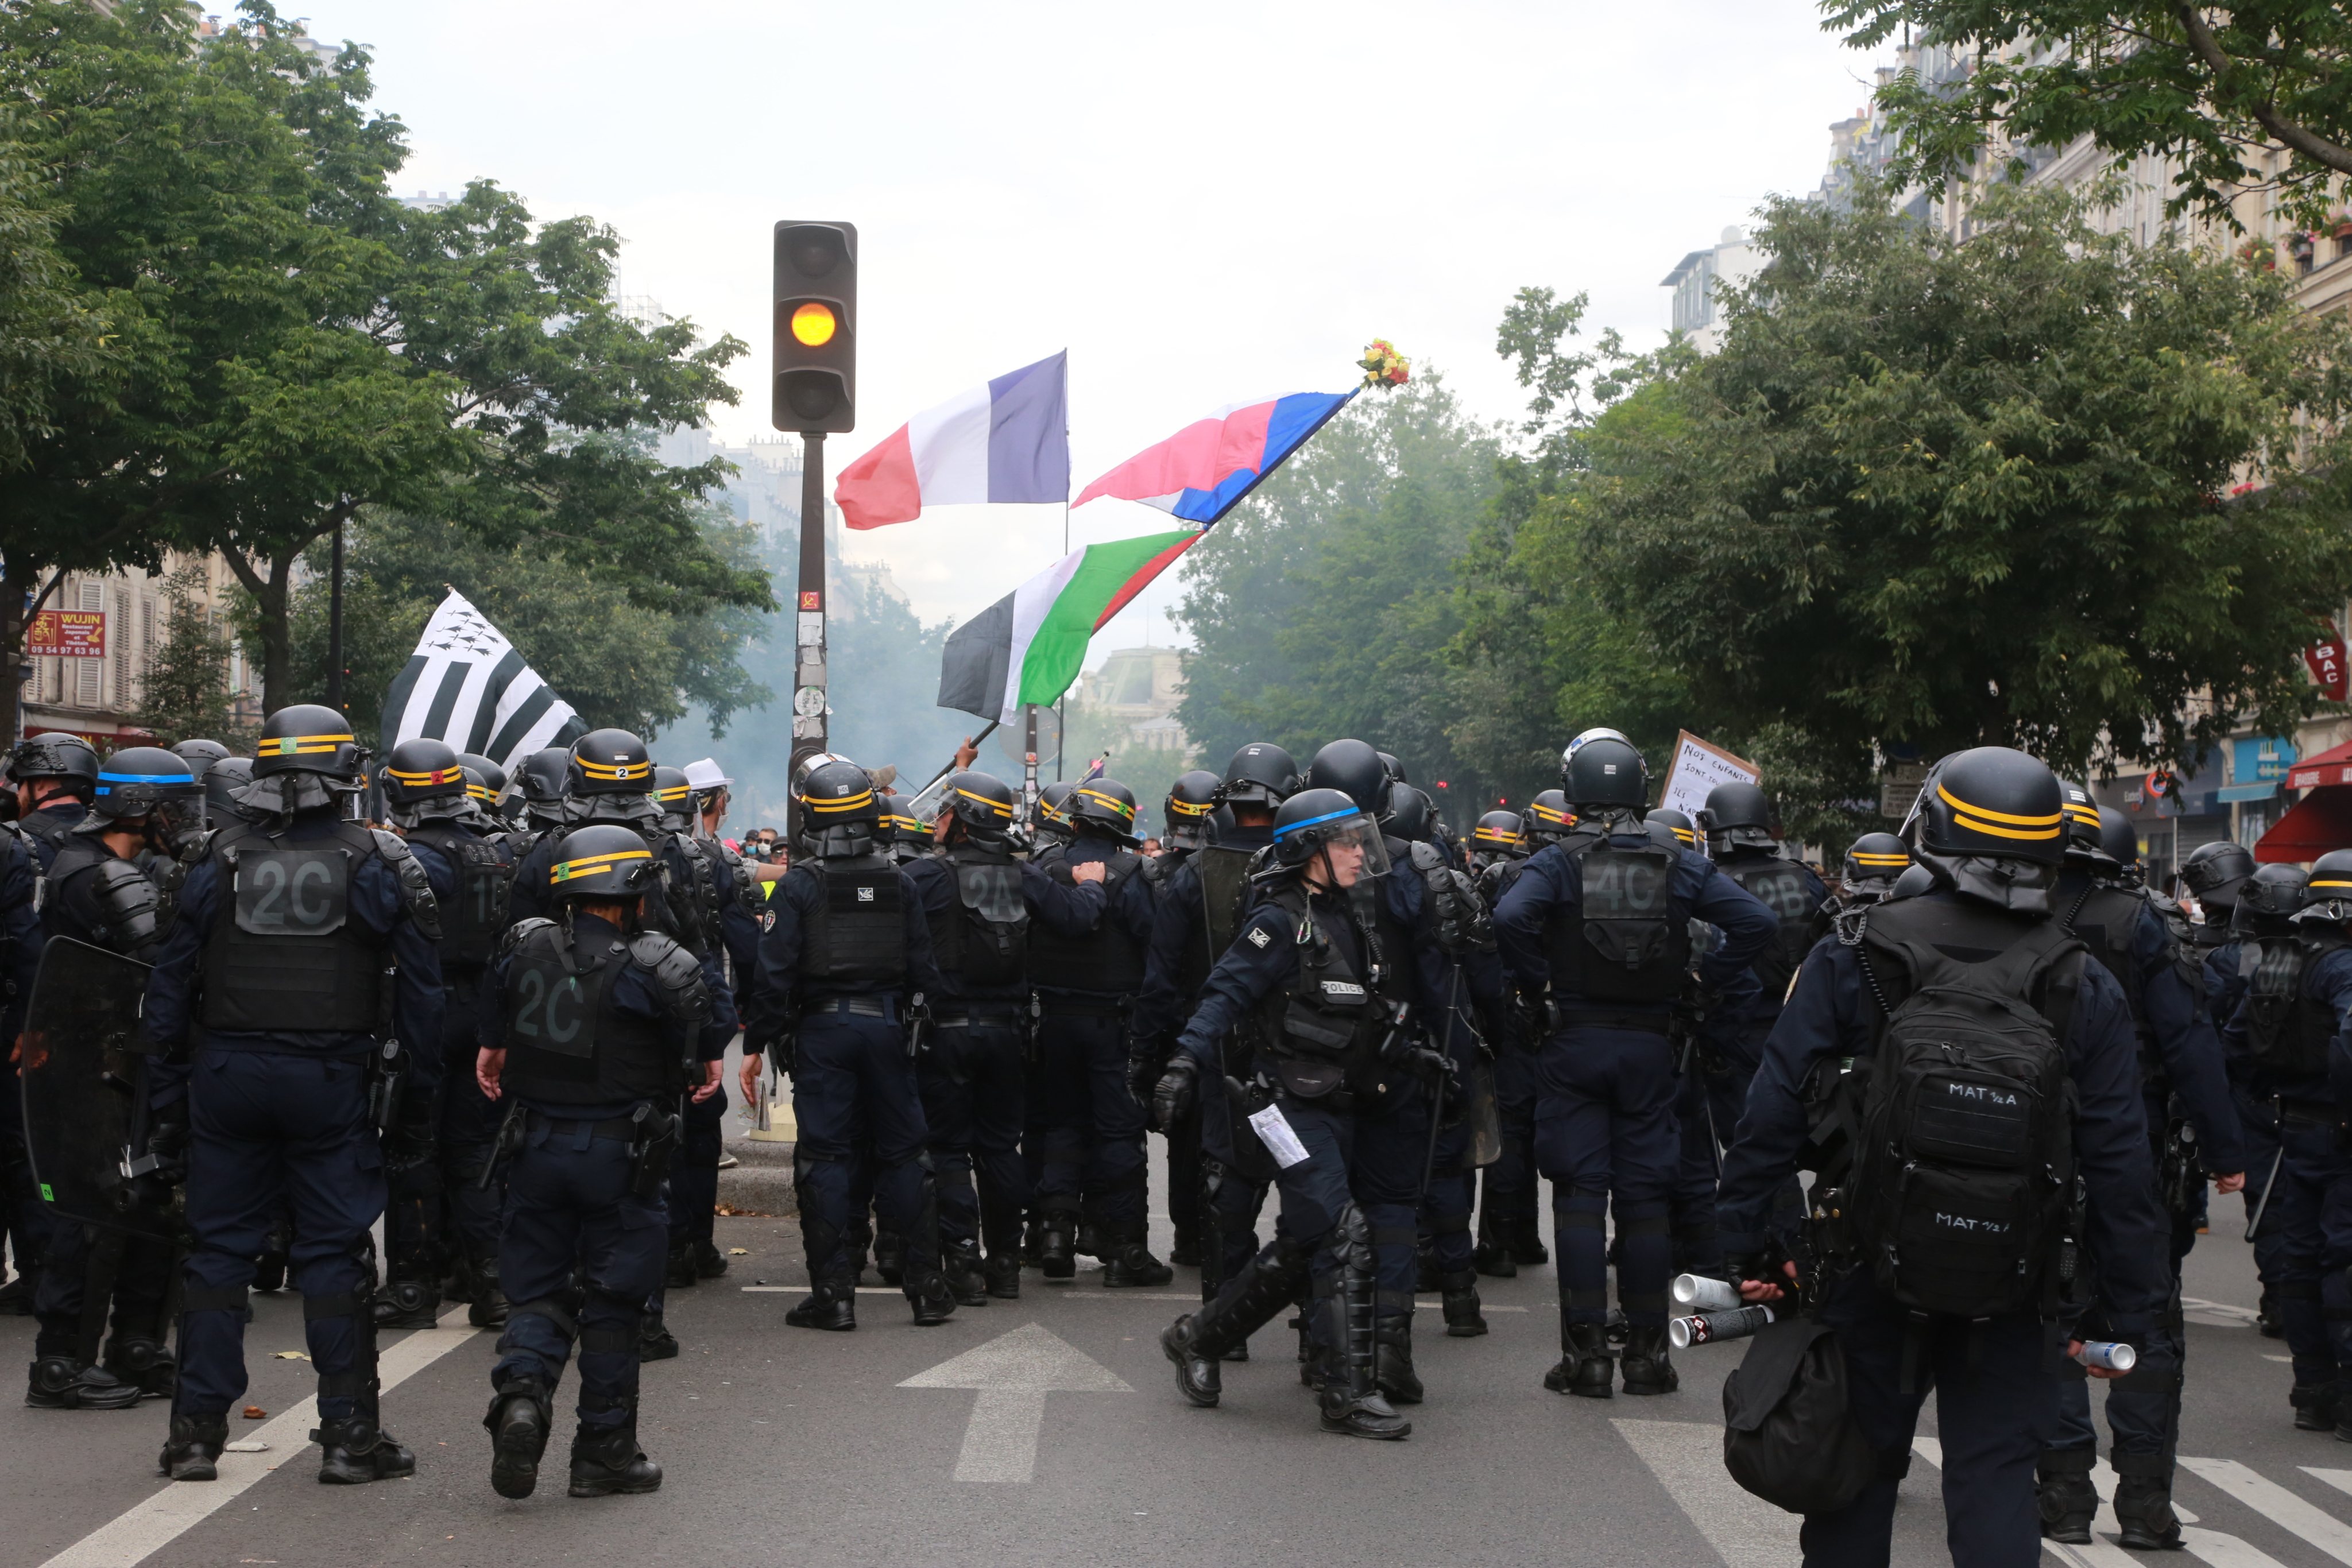 Protesters Hold An Anti-Covid Rule Demonstration In Paris